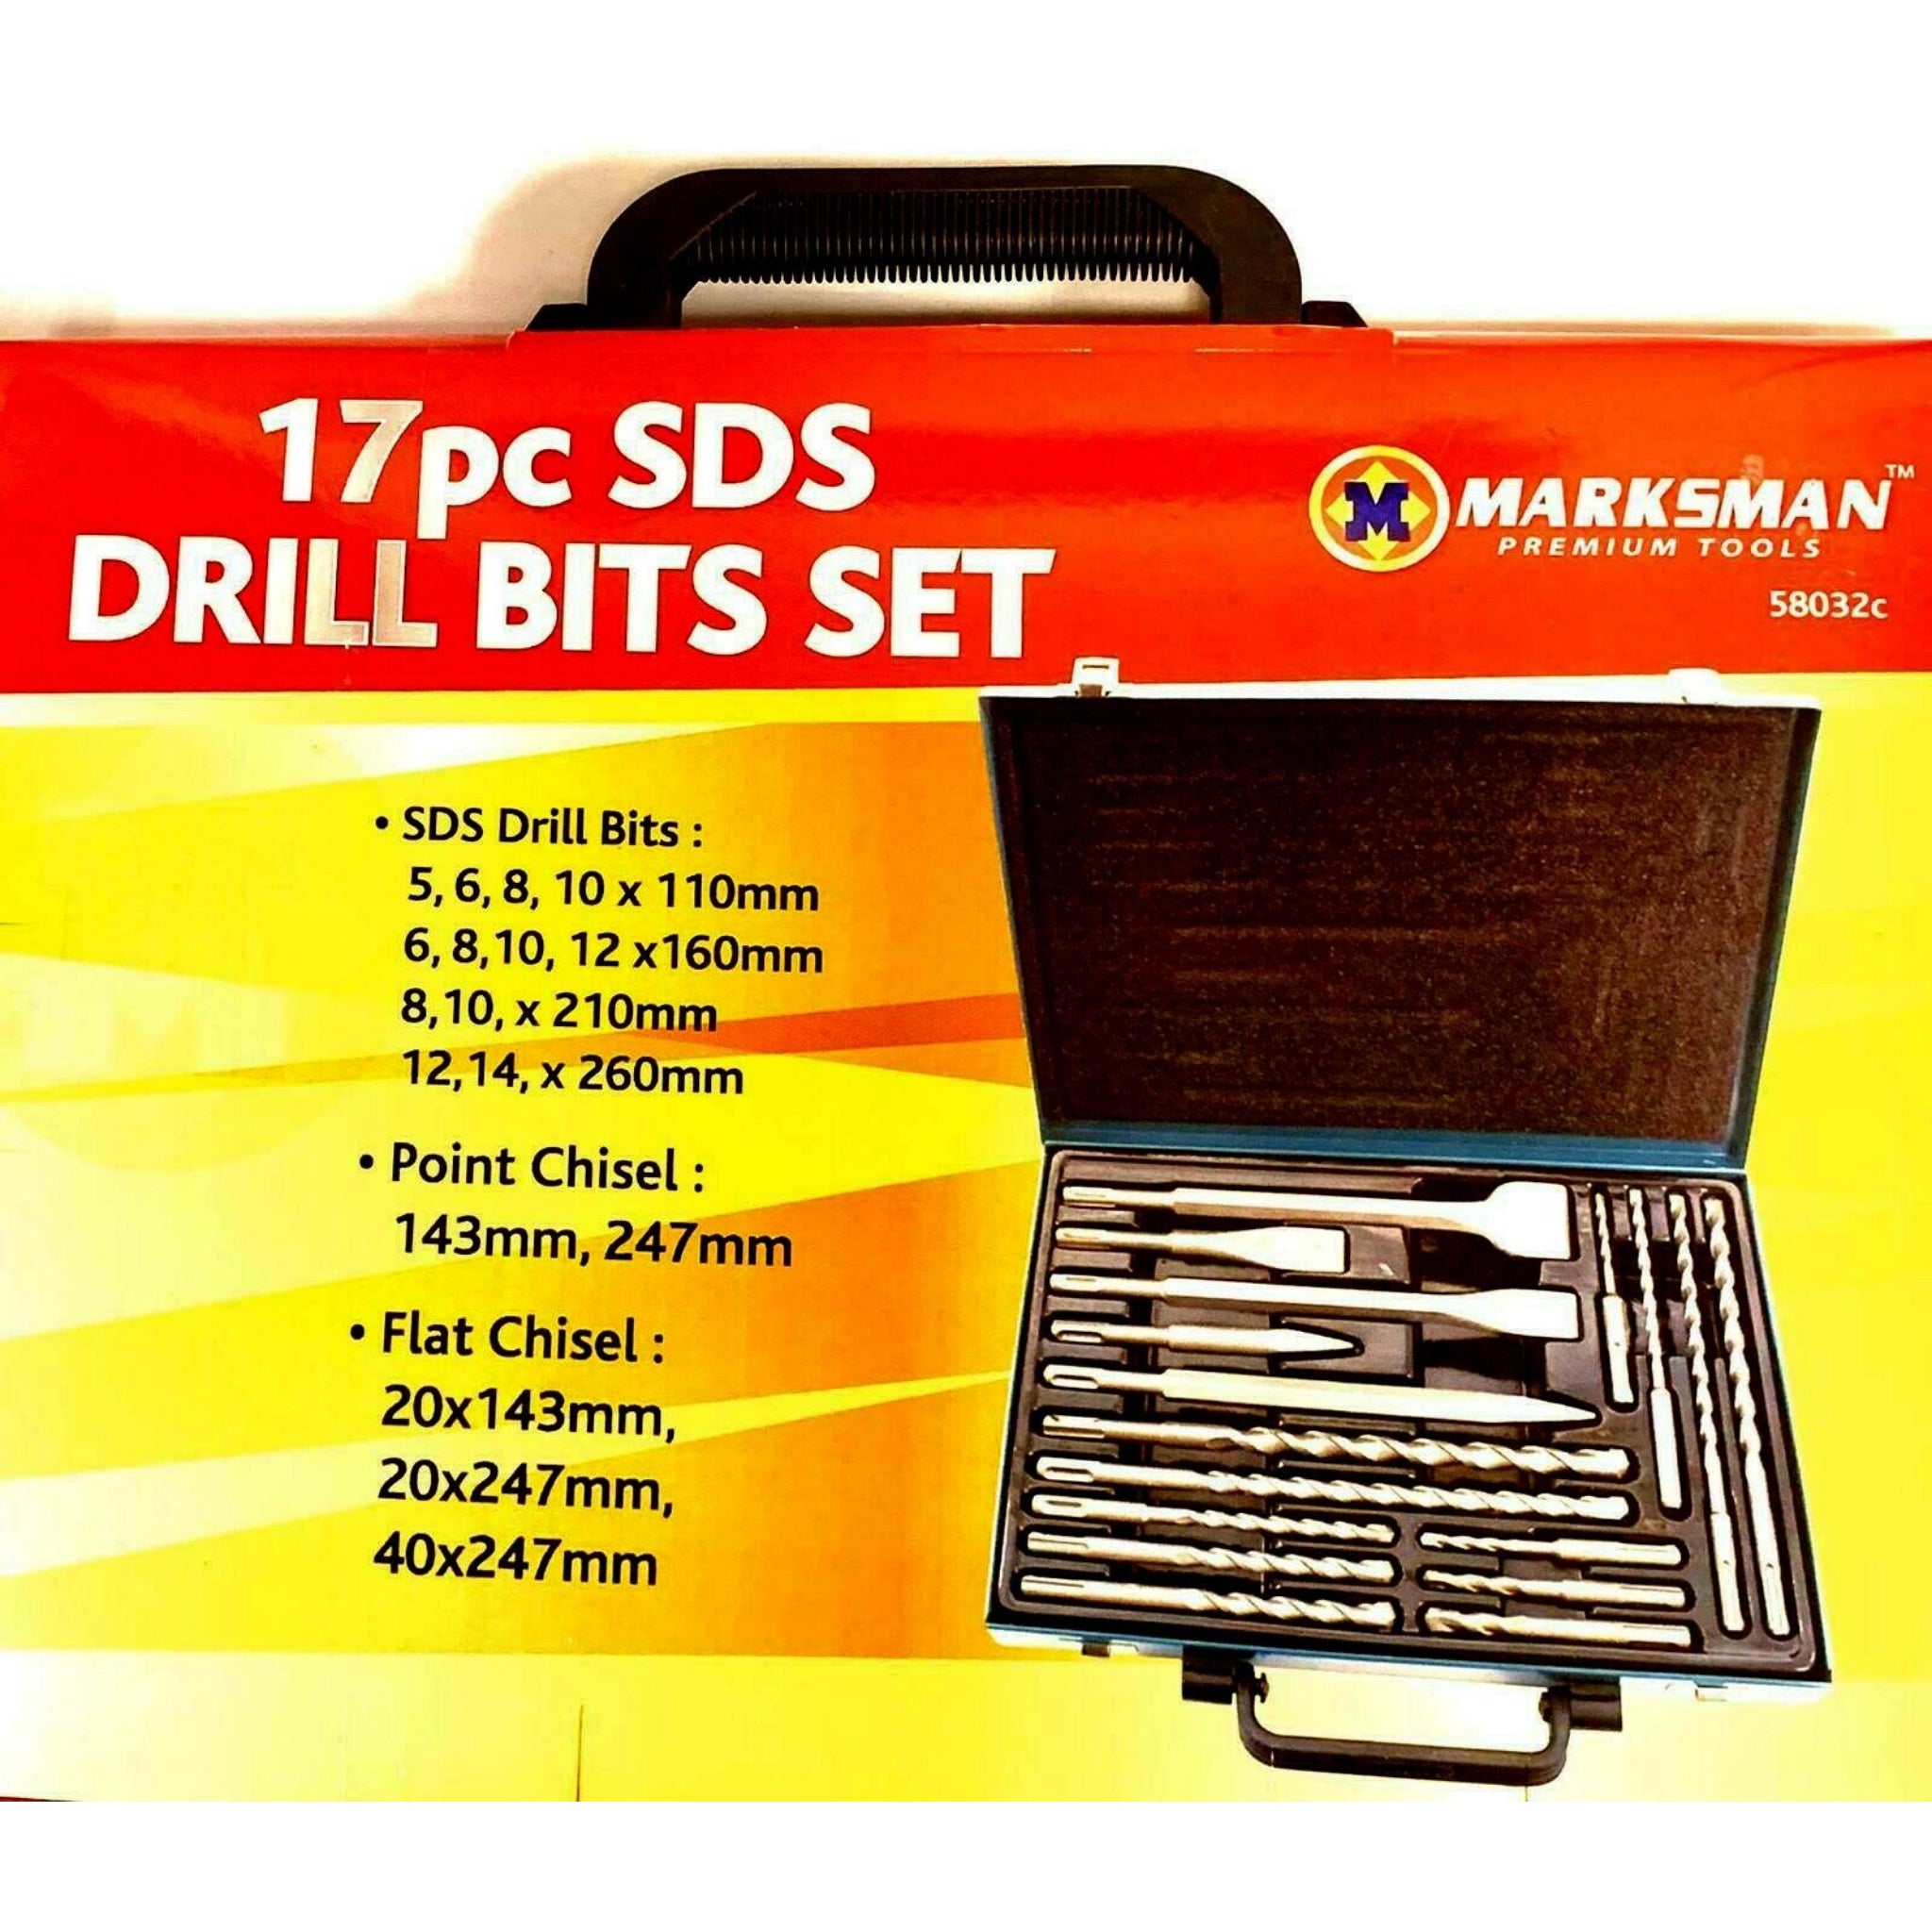 Beclen Harp 17pc SDS Drill Bits Set With Point And Flat Chisel In Metal Along With Storage Case-Perfect DIY Tool Kit Masonry